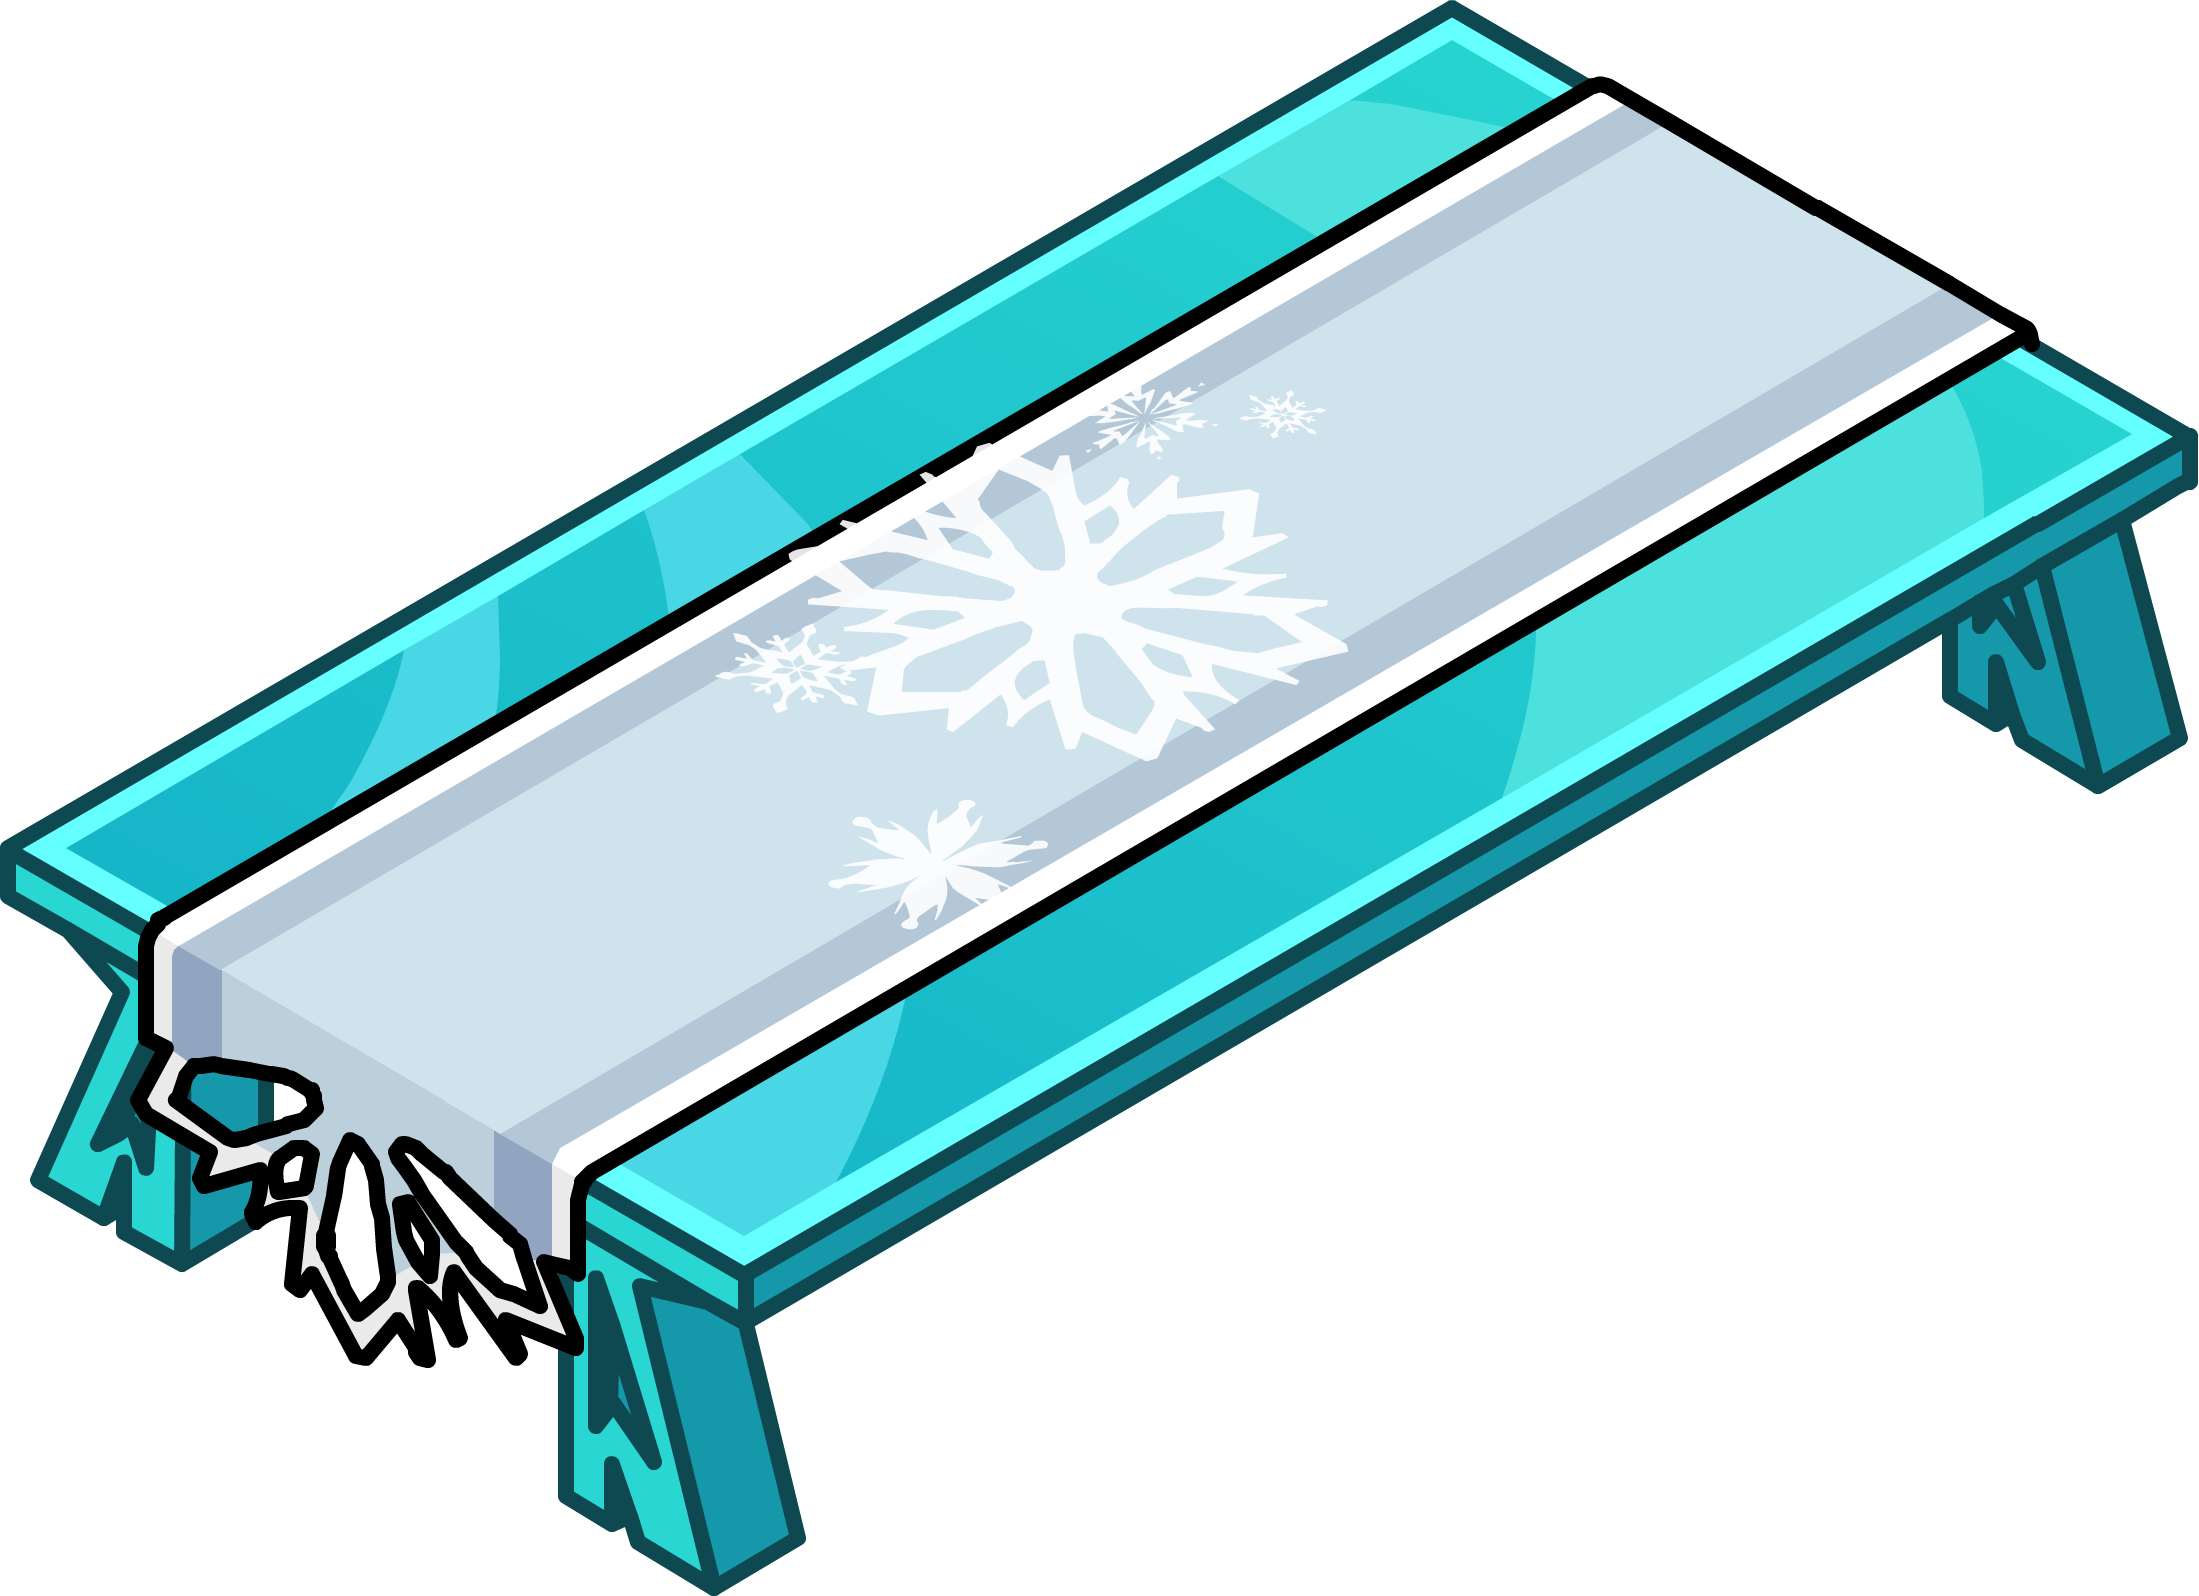 Ice Dining Table - Club Penguin Frozen Items (2199x1596)